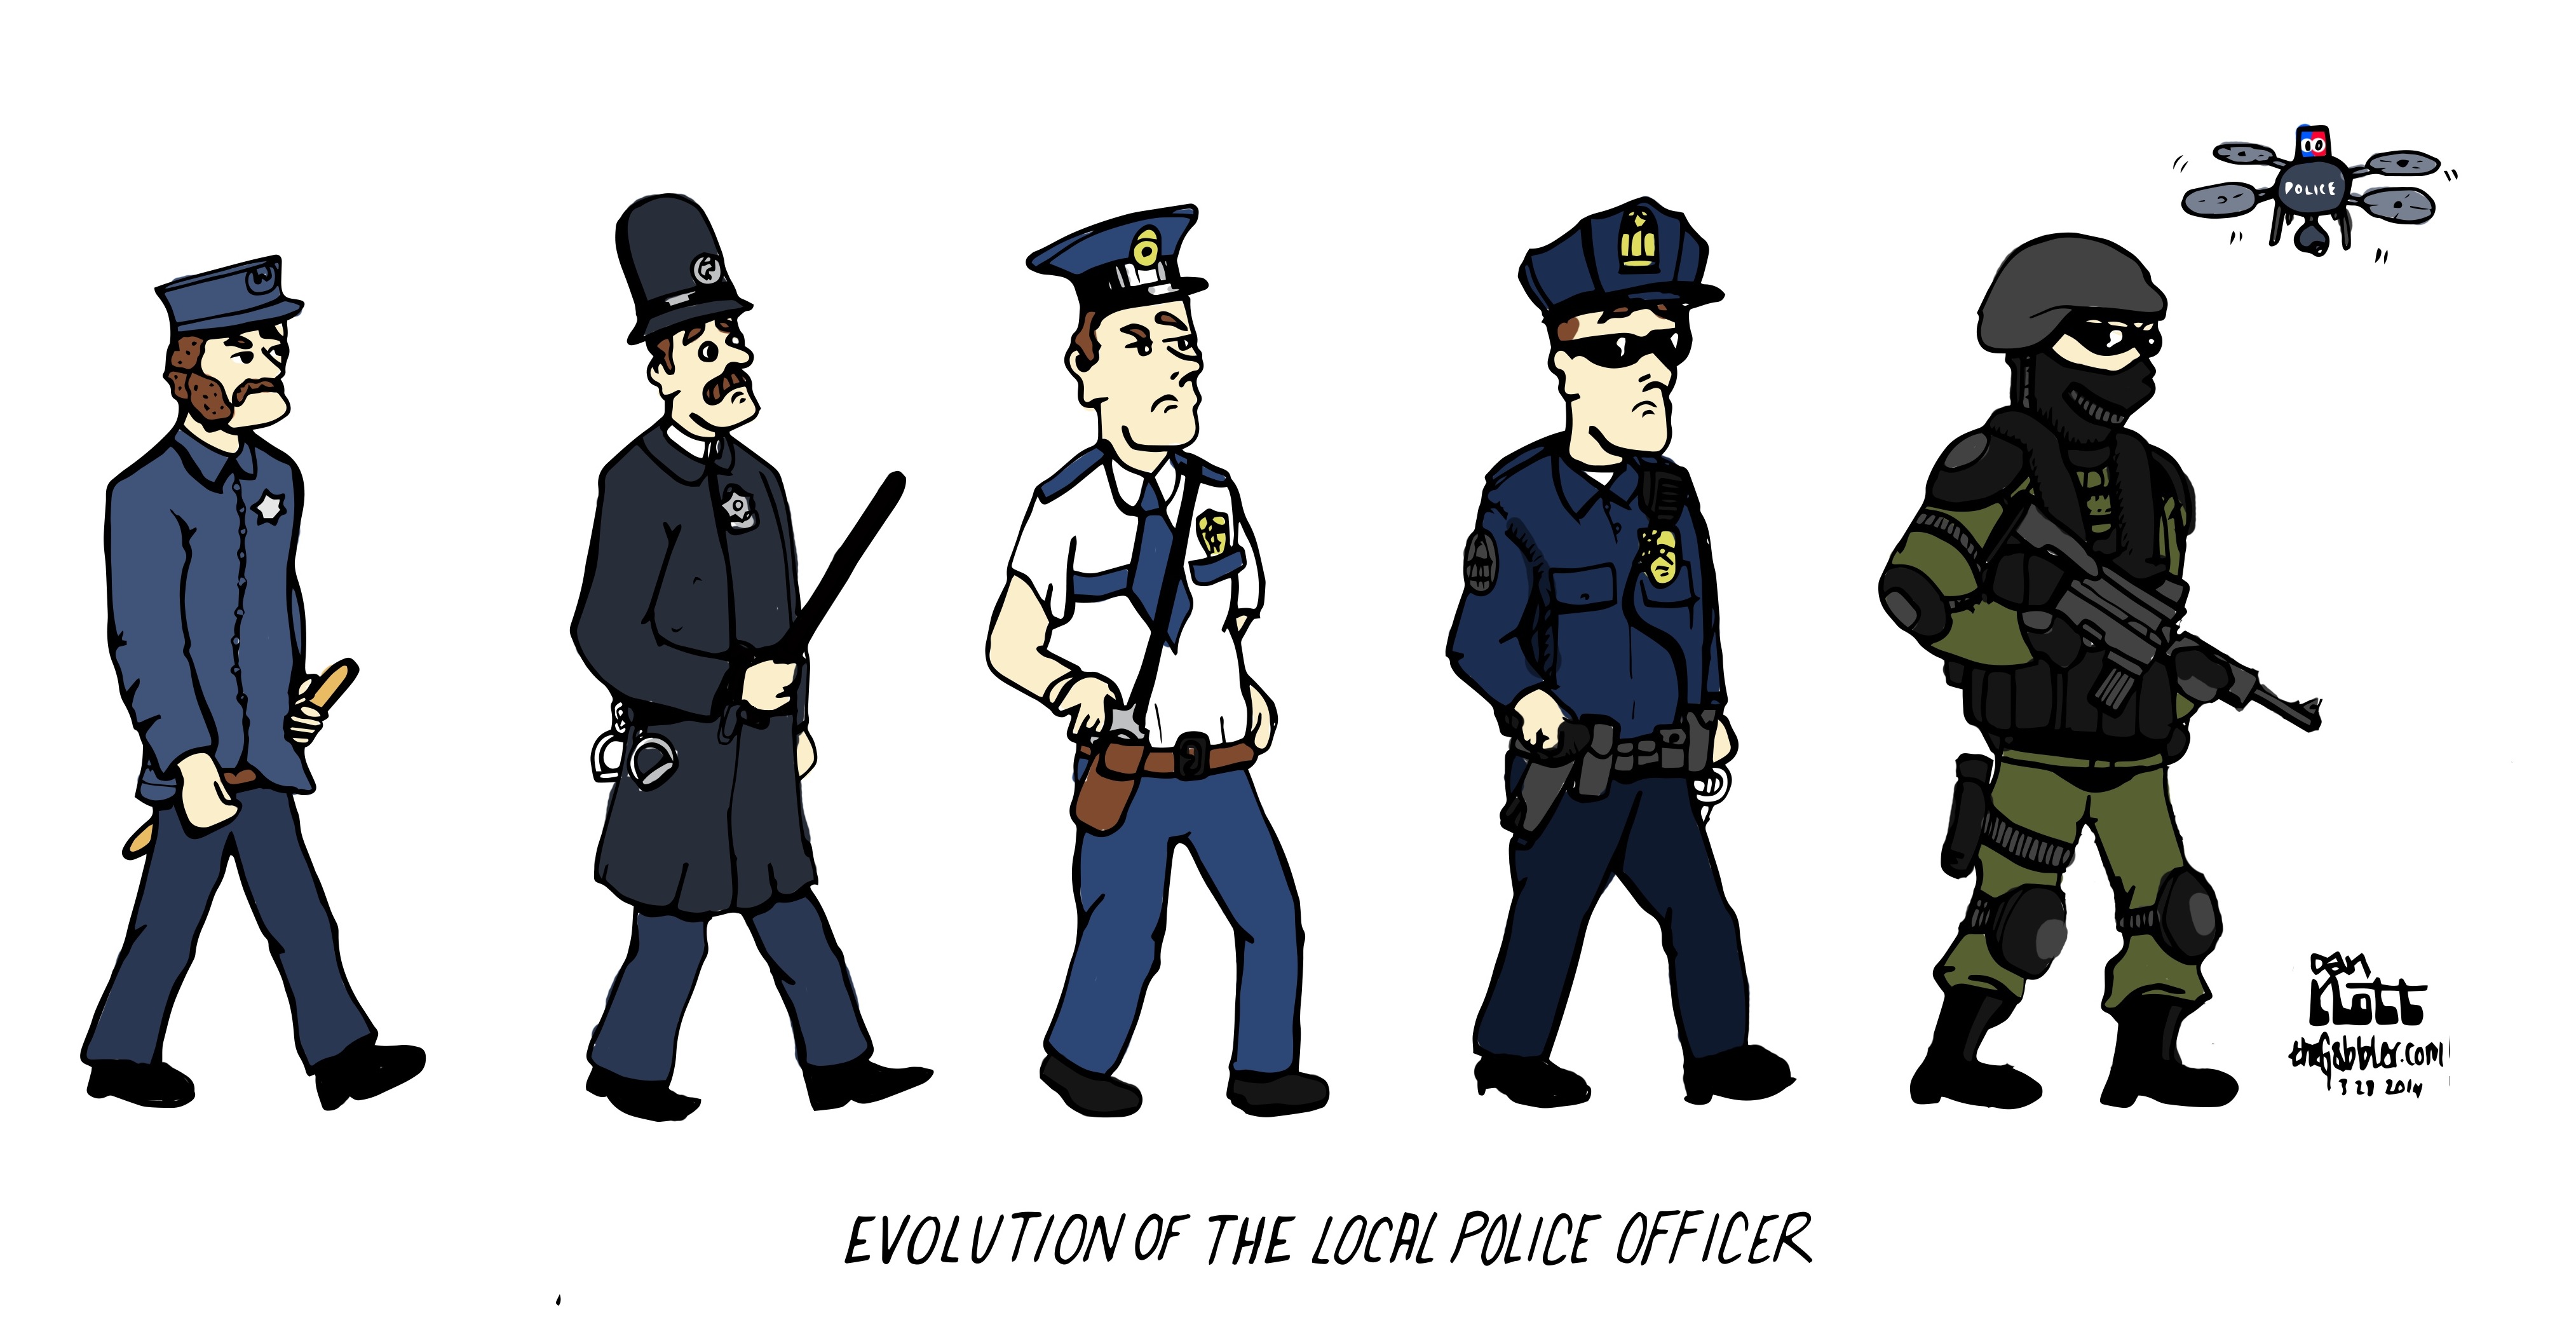 Evolution of a local police officer